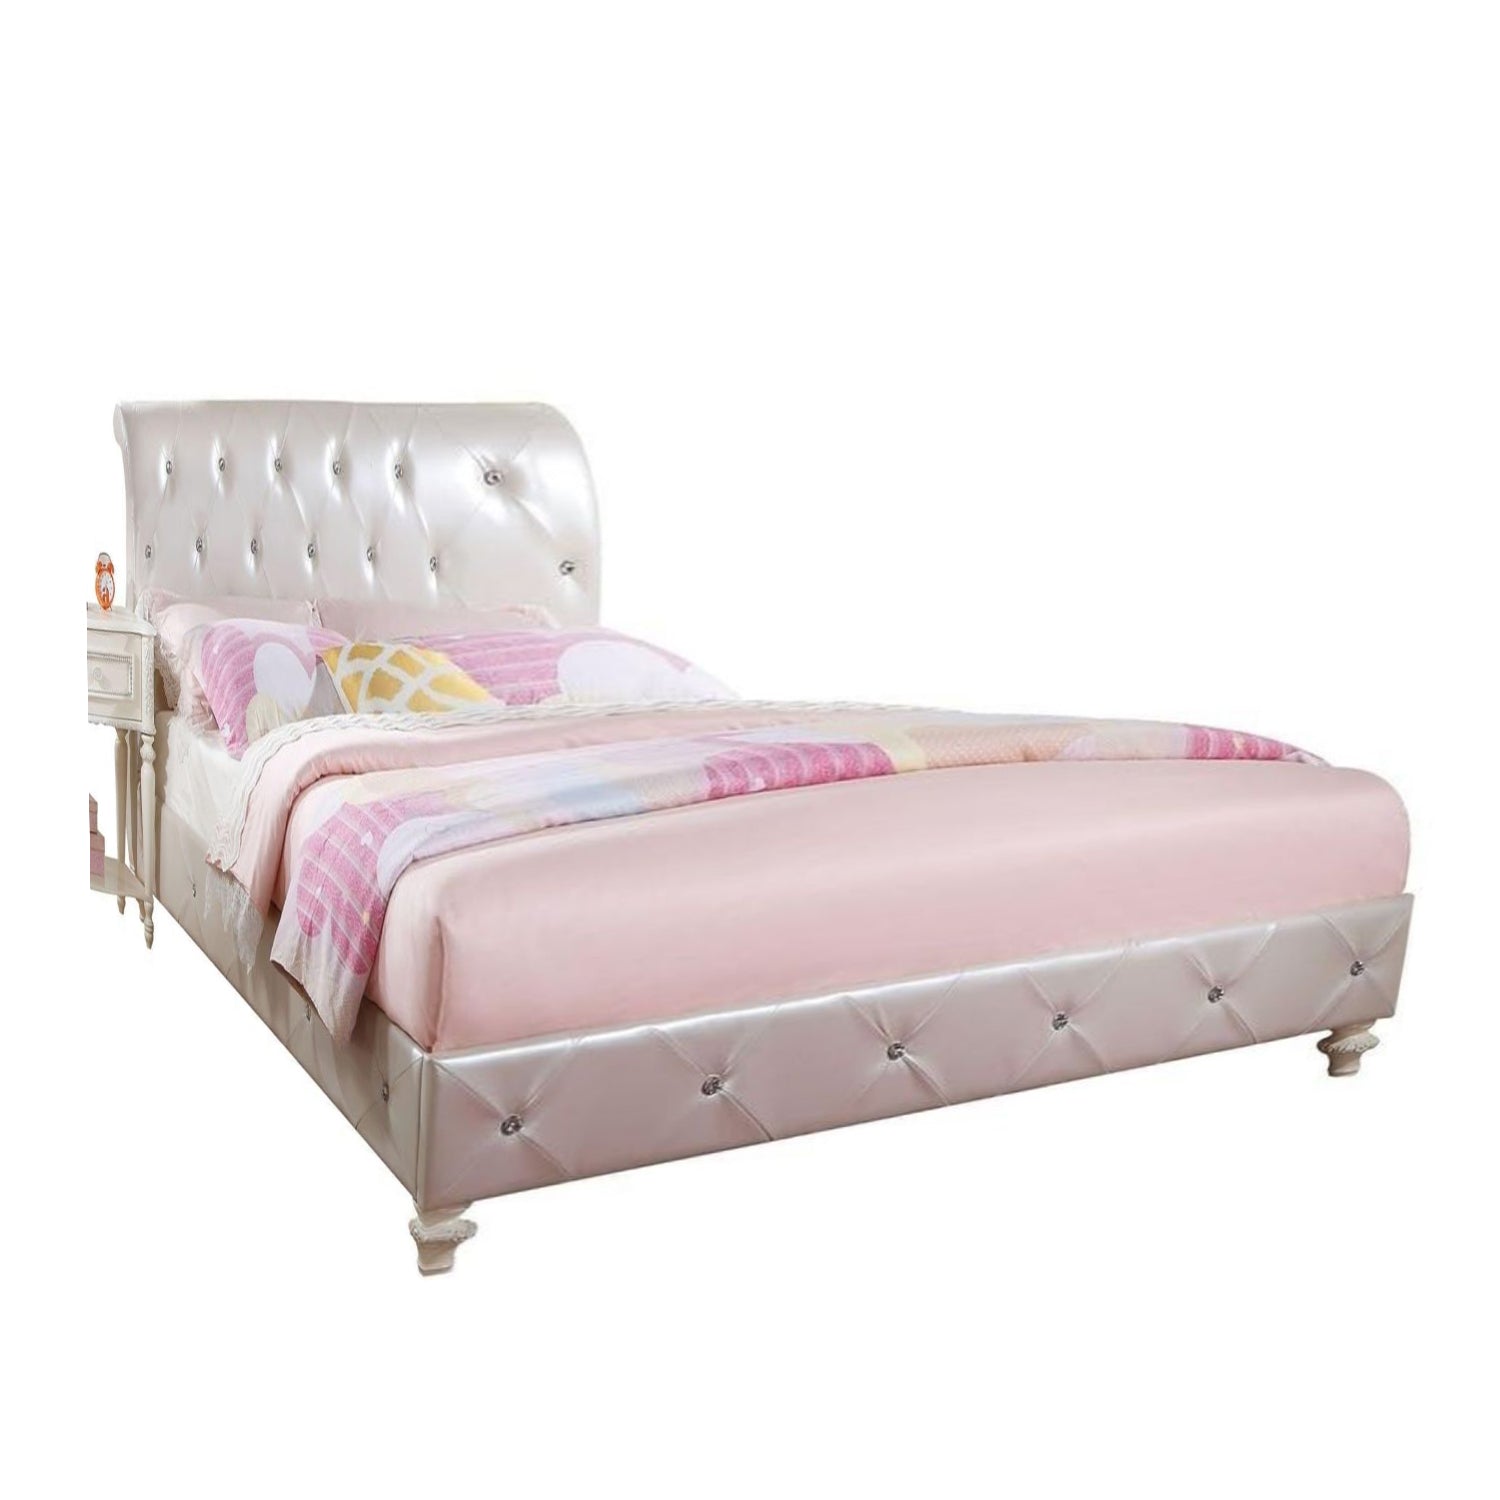 87" X 42" X 44" Pearl White Pu And Ivory Twin Padded Bed Default Title